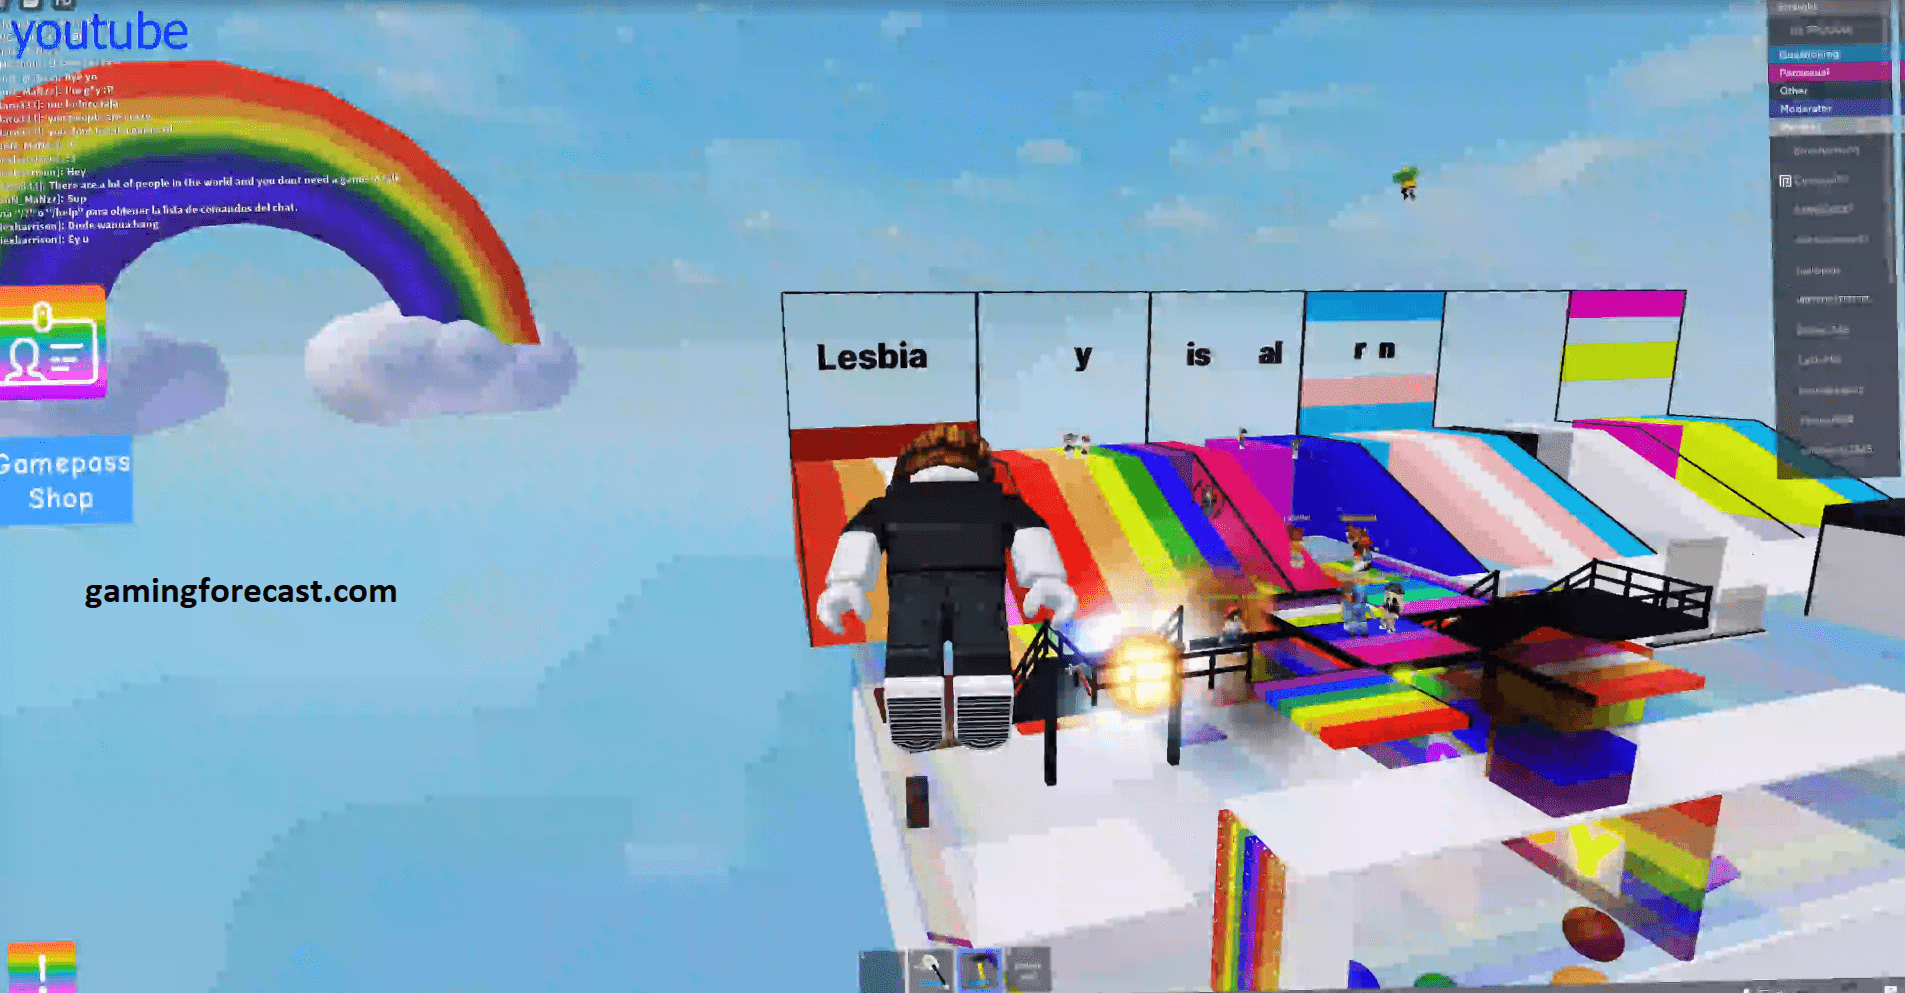 Roblox Hack Download Pc Destroy Lobby Fly Aimbot Scripts 2021 Gaming Forecast Download Free Online Game Hacks - roblox download for free pc